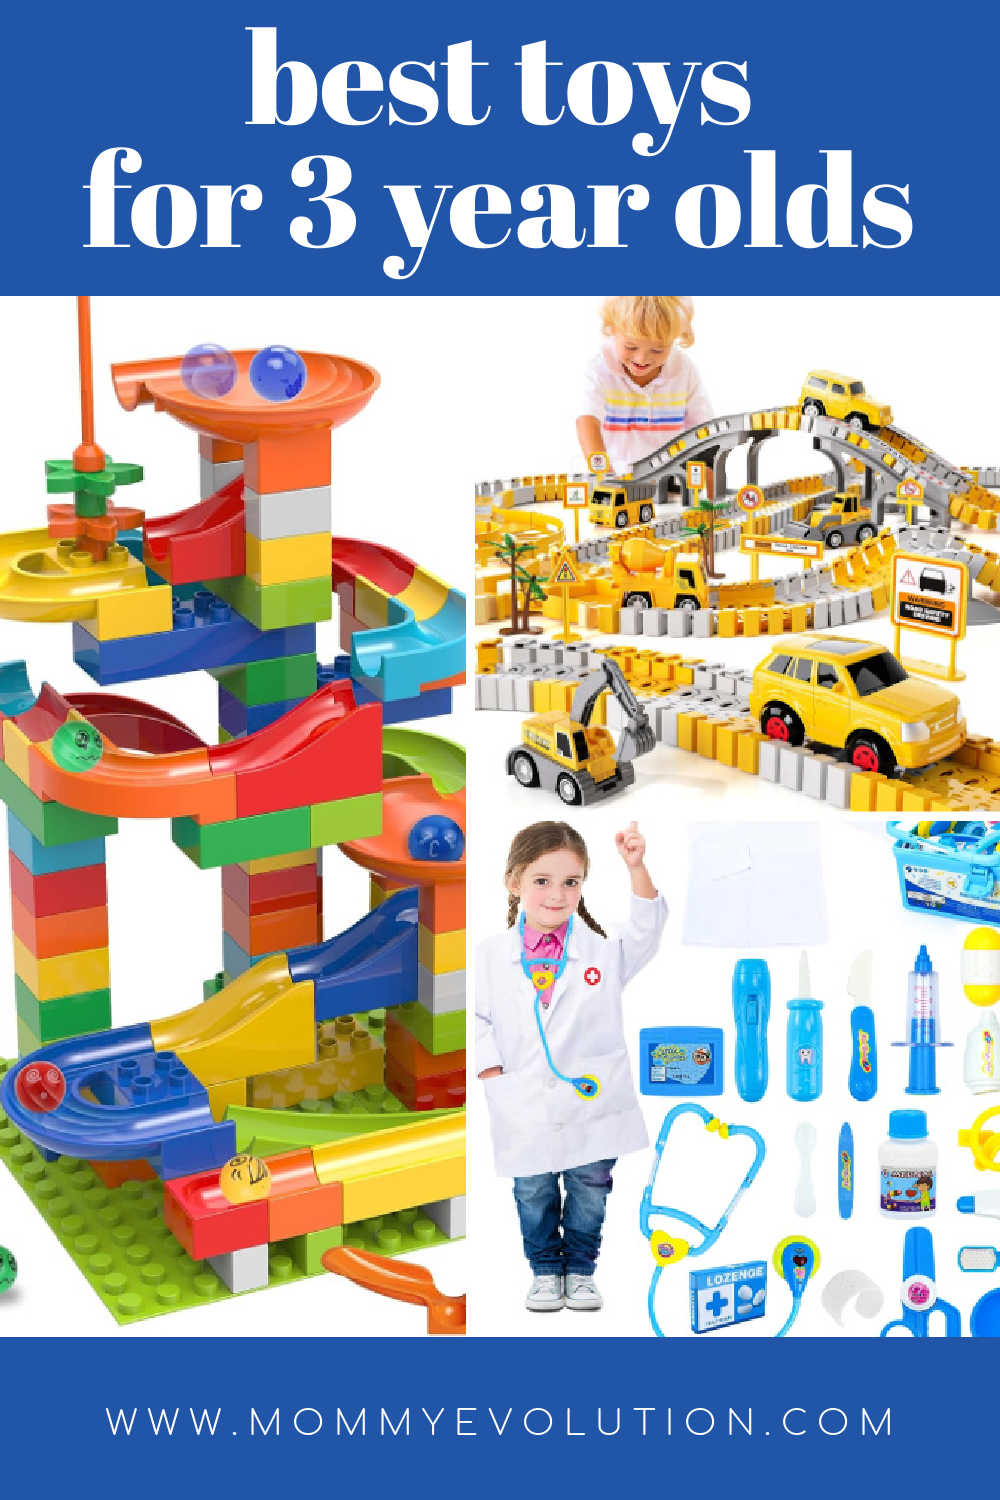 Best Toys for 3 Year Olds